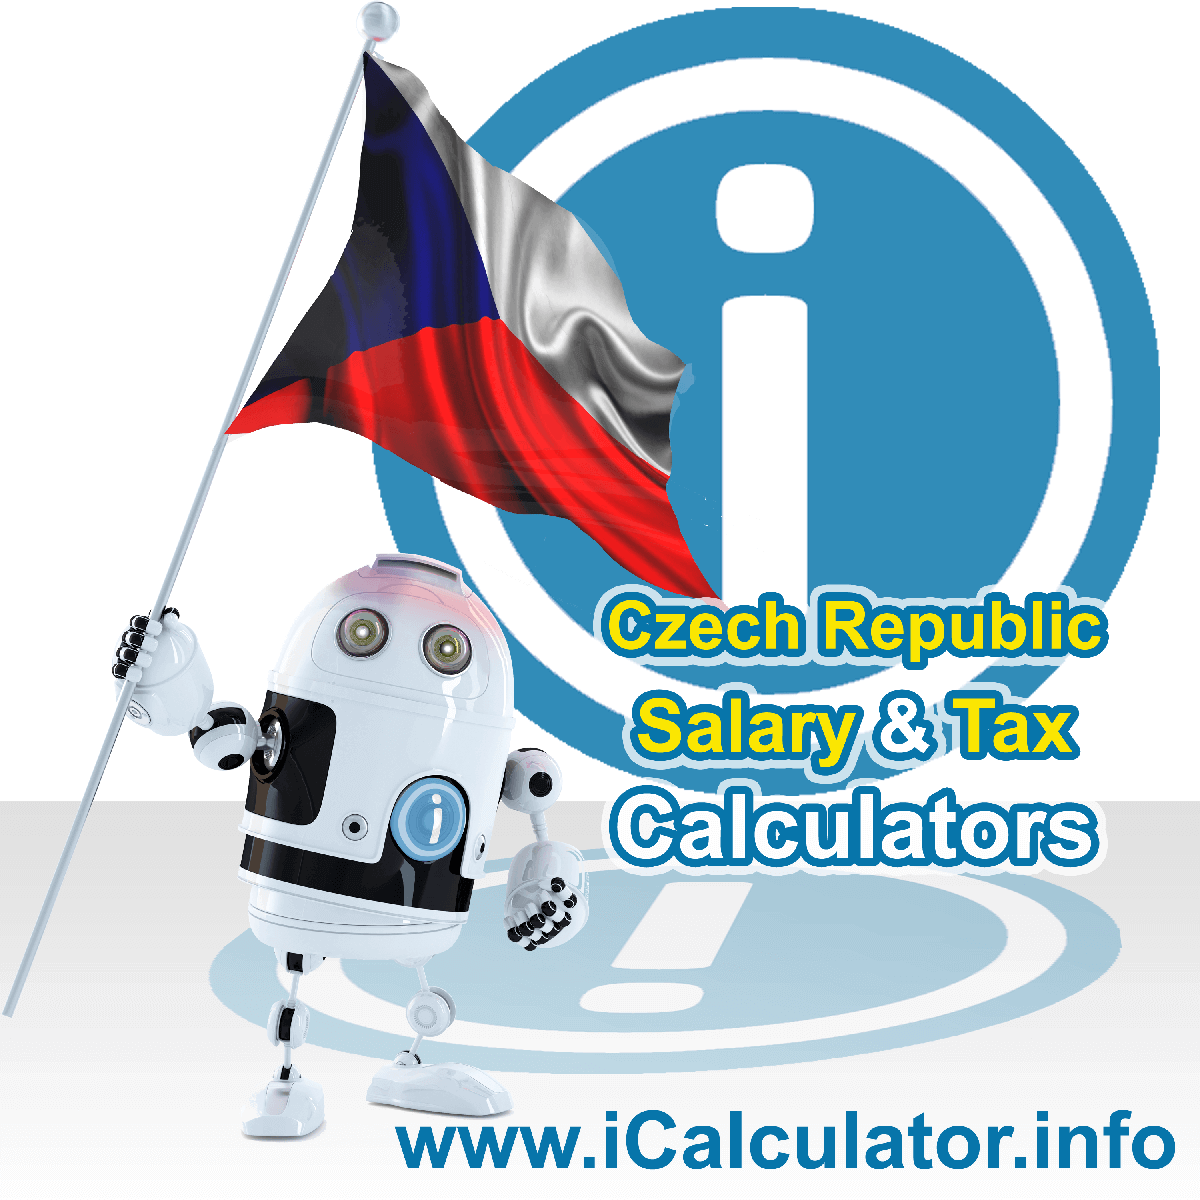 Czech Republic Salary Calculator. This image shows the Czech Republicese flag and information relating to the tax formula for the Czech Republic Tax Calculator